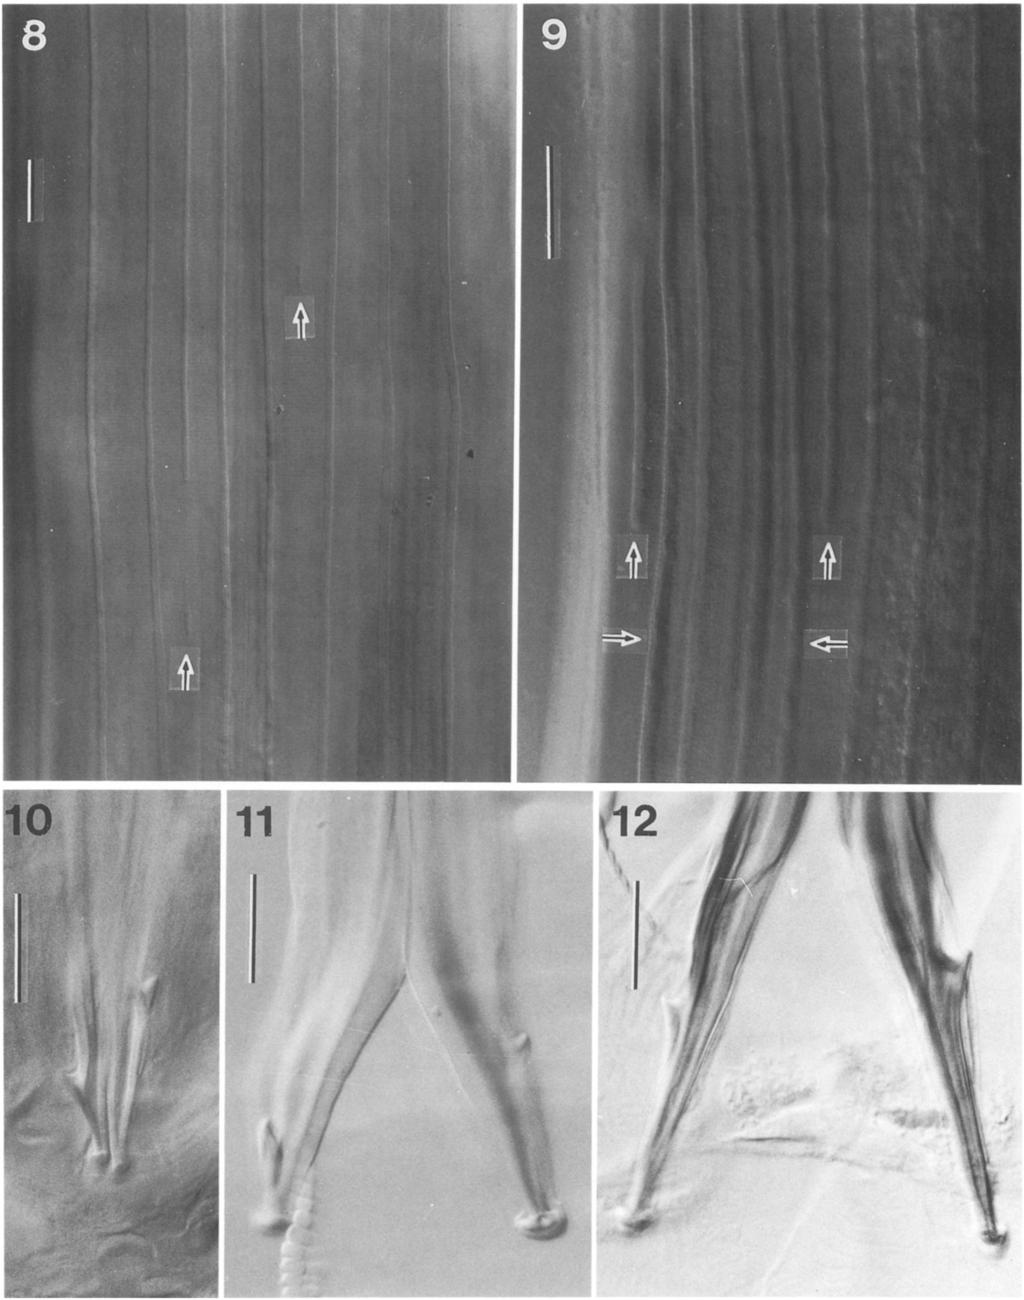 112 THE JOURNAL OF PARASTOLOGY, VOL. 80, NO. 1, FEBRUARY 1994 FGURES 8-12. Lateral synlophe patterns and spicule tips of 3 species of Haemonchus (scale bars = 25 gm). 8. Lateral synlophe of H.